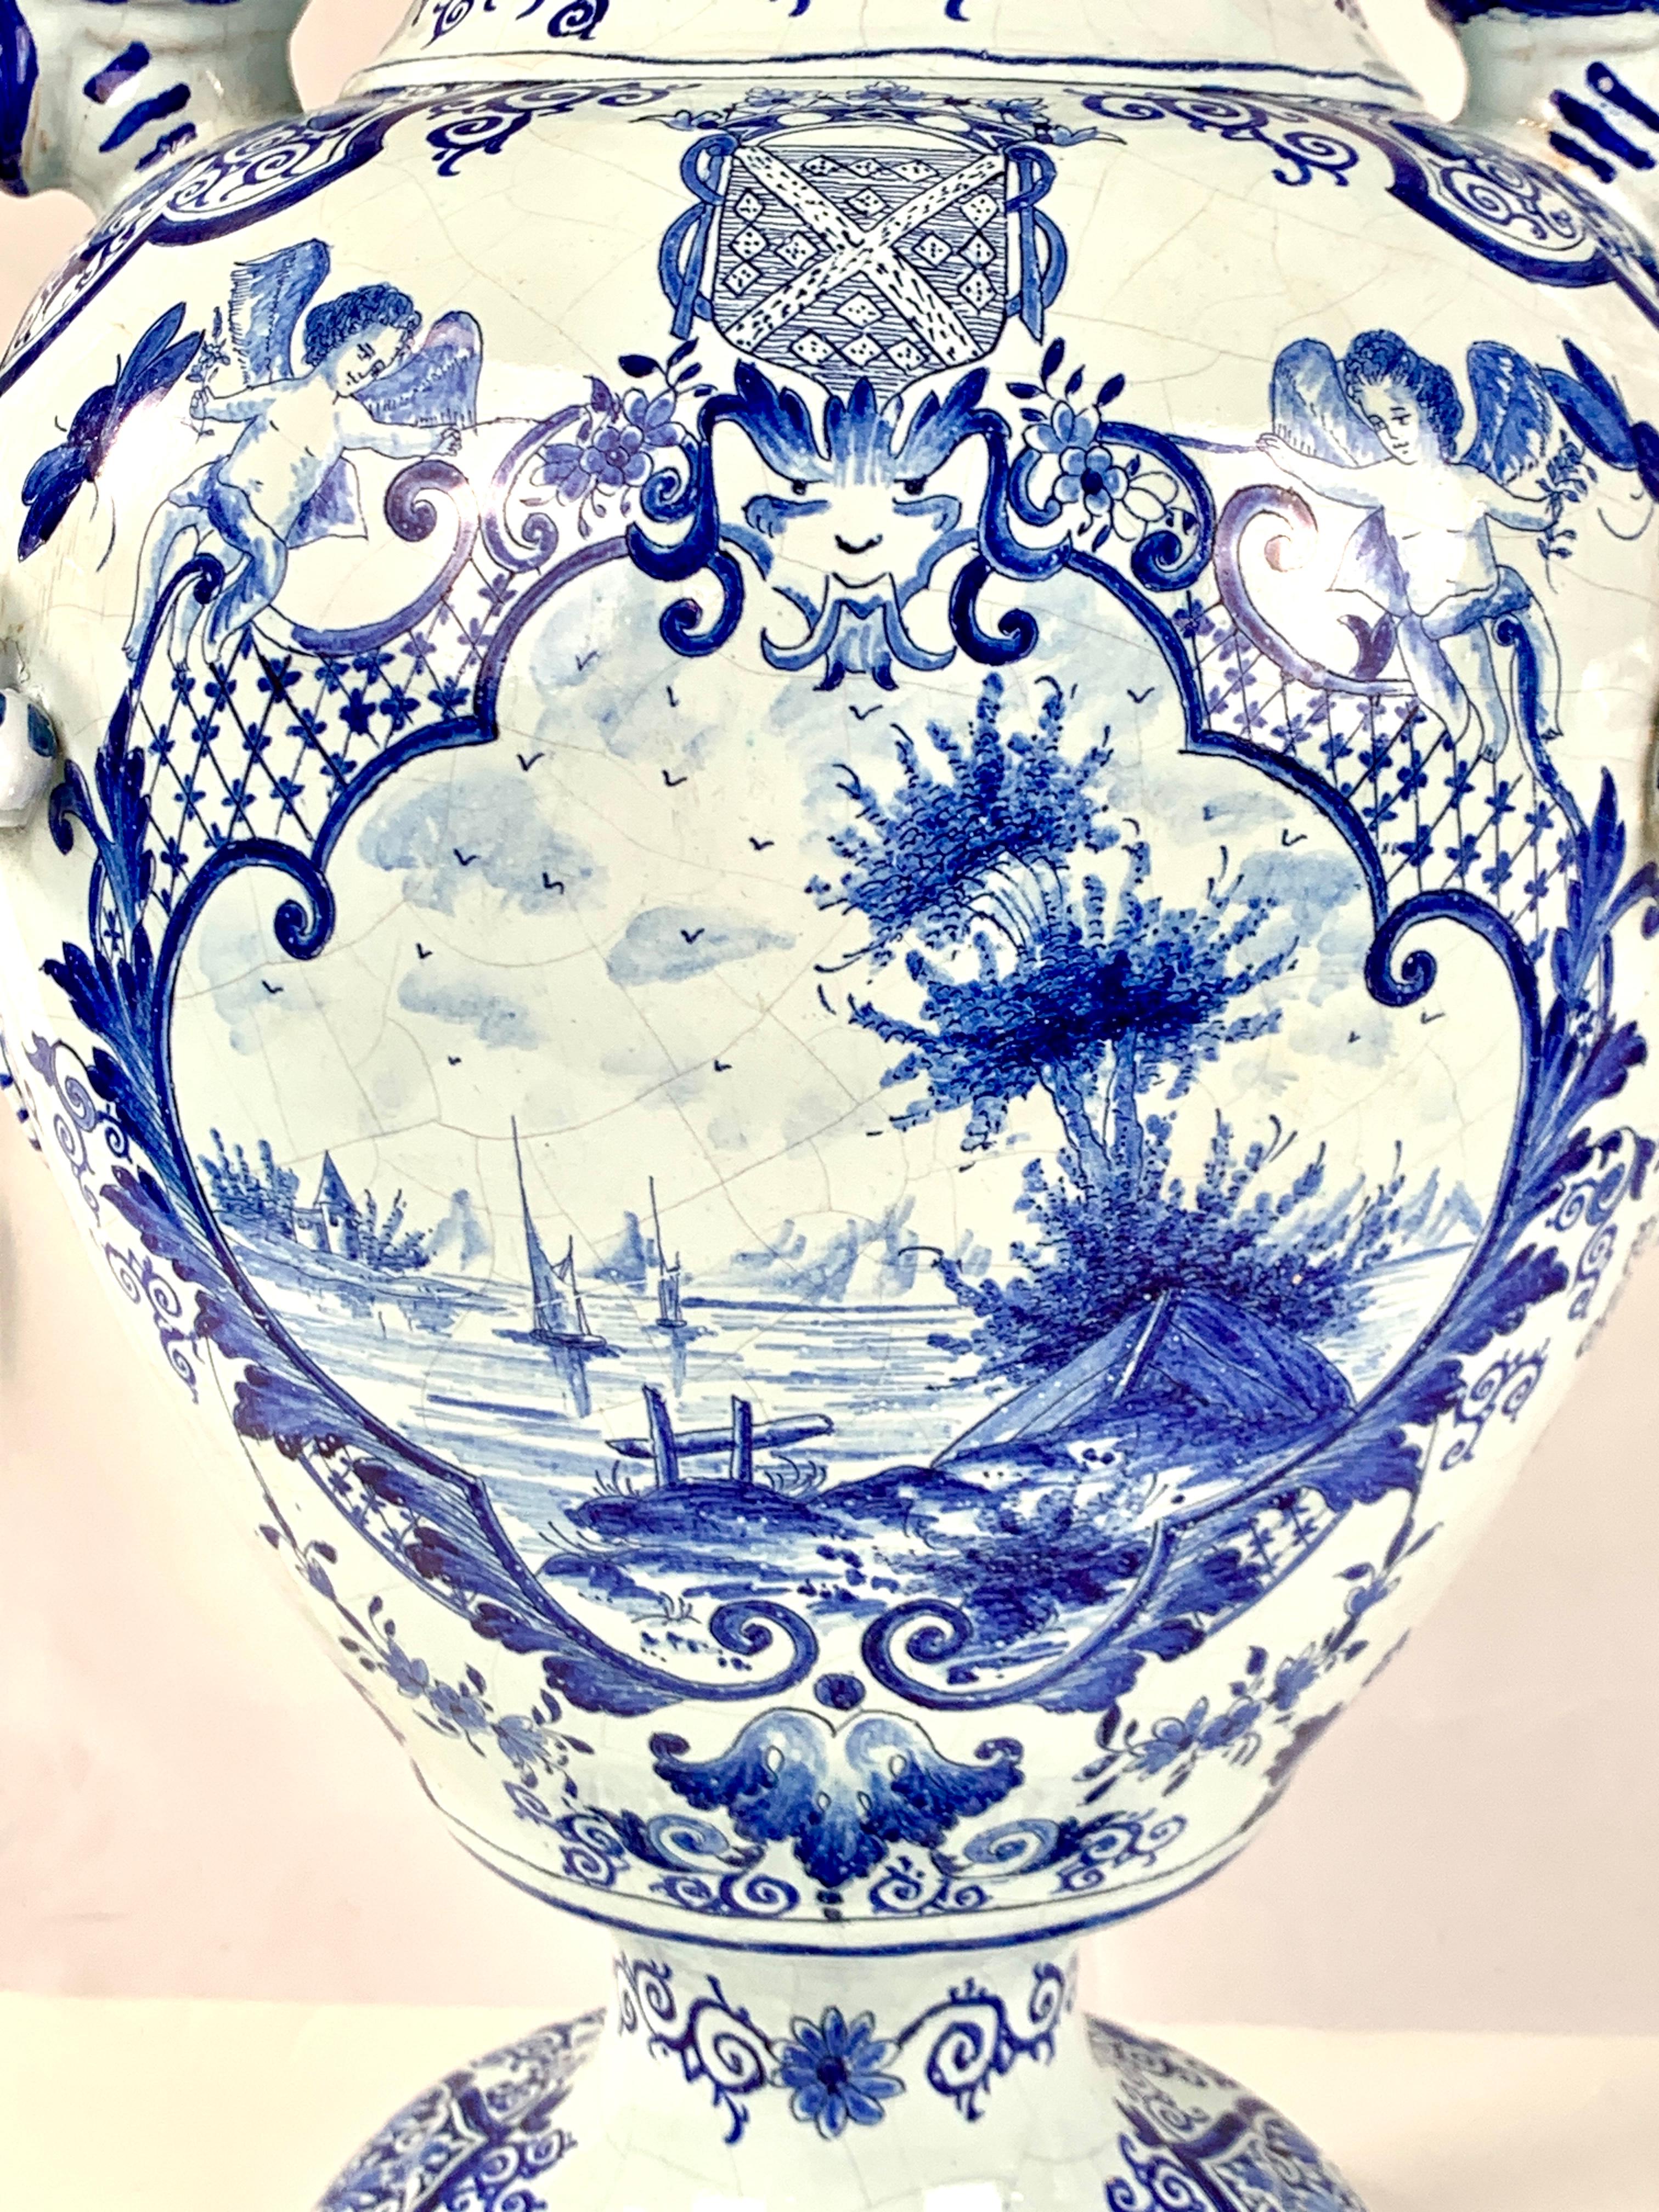 The first thing you notice is the magnificent spiral snake handles. 
This large blue and white Dutch Delft covered jar is fully decorated!
The elaborate decoration on the front features a lovely waterside scene topped with an armorial shield